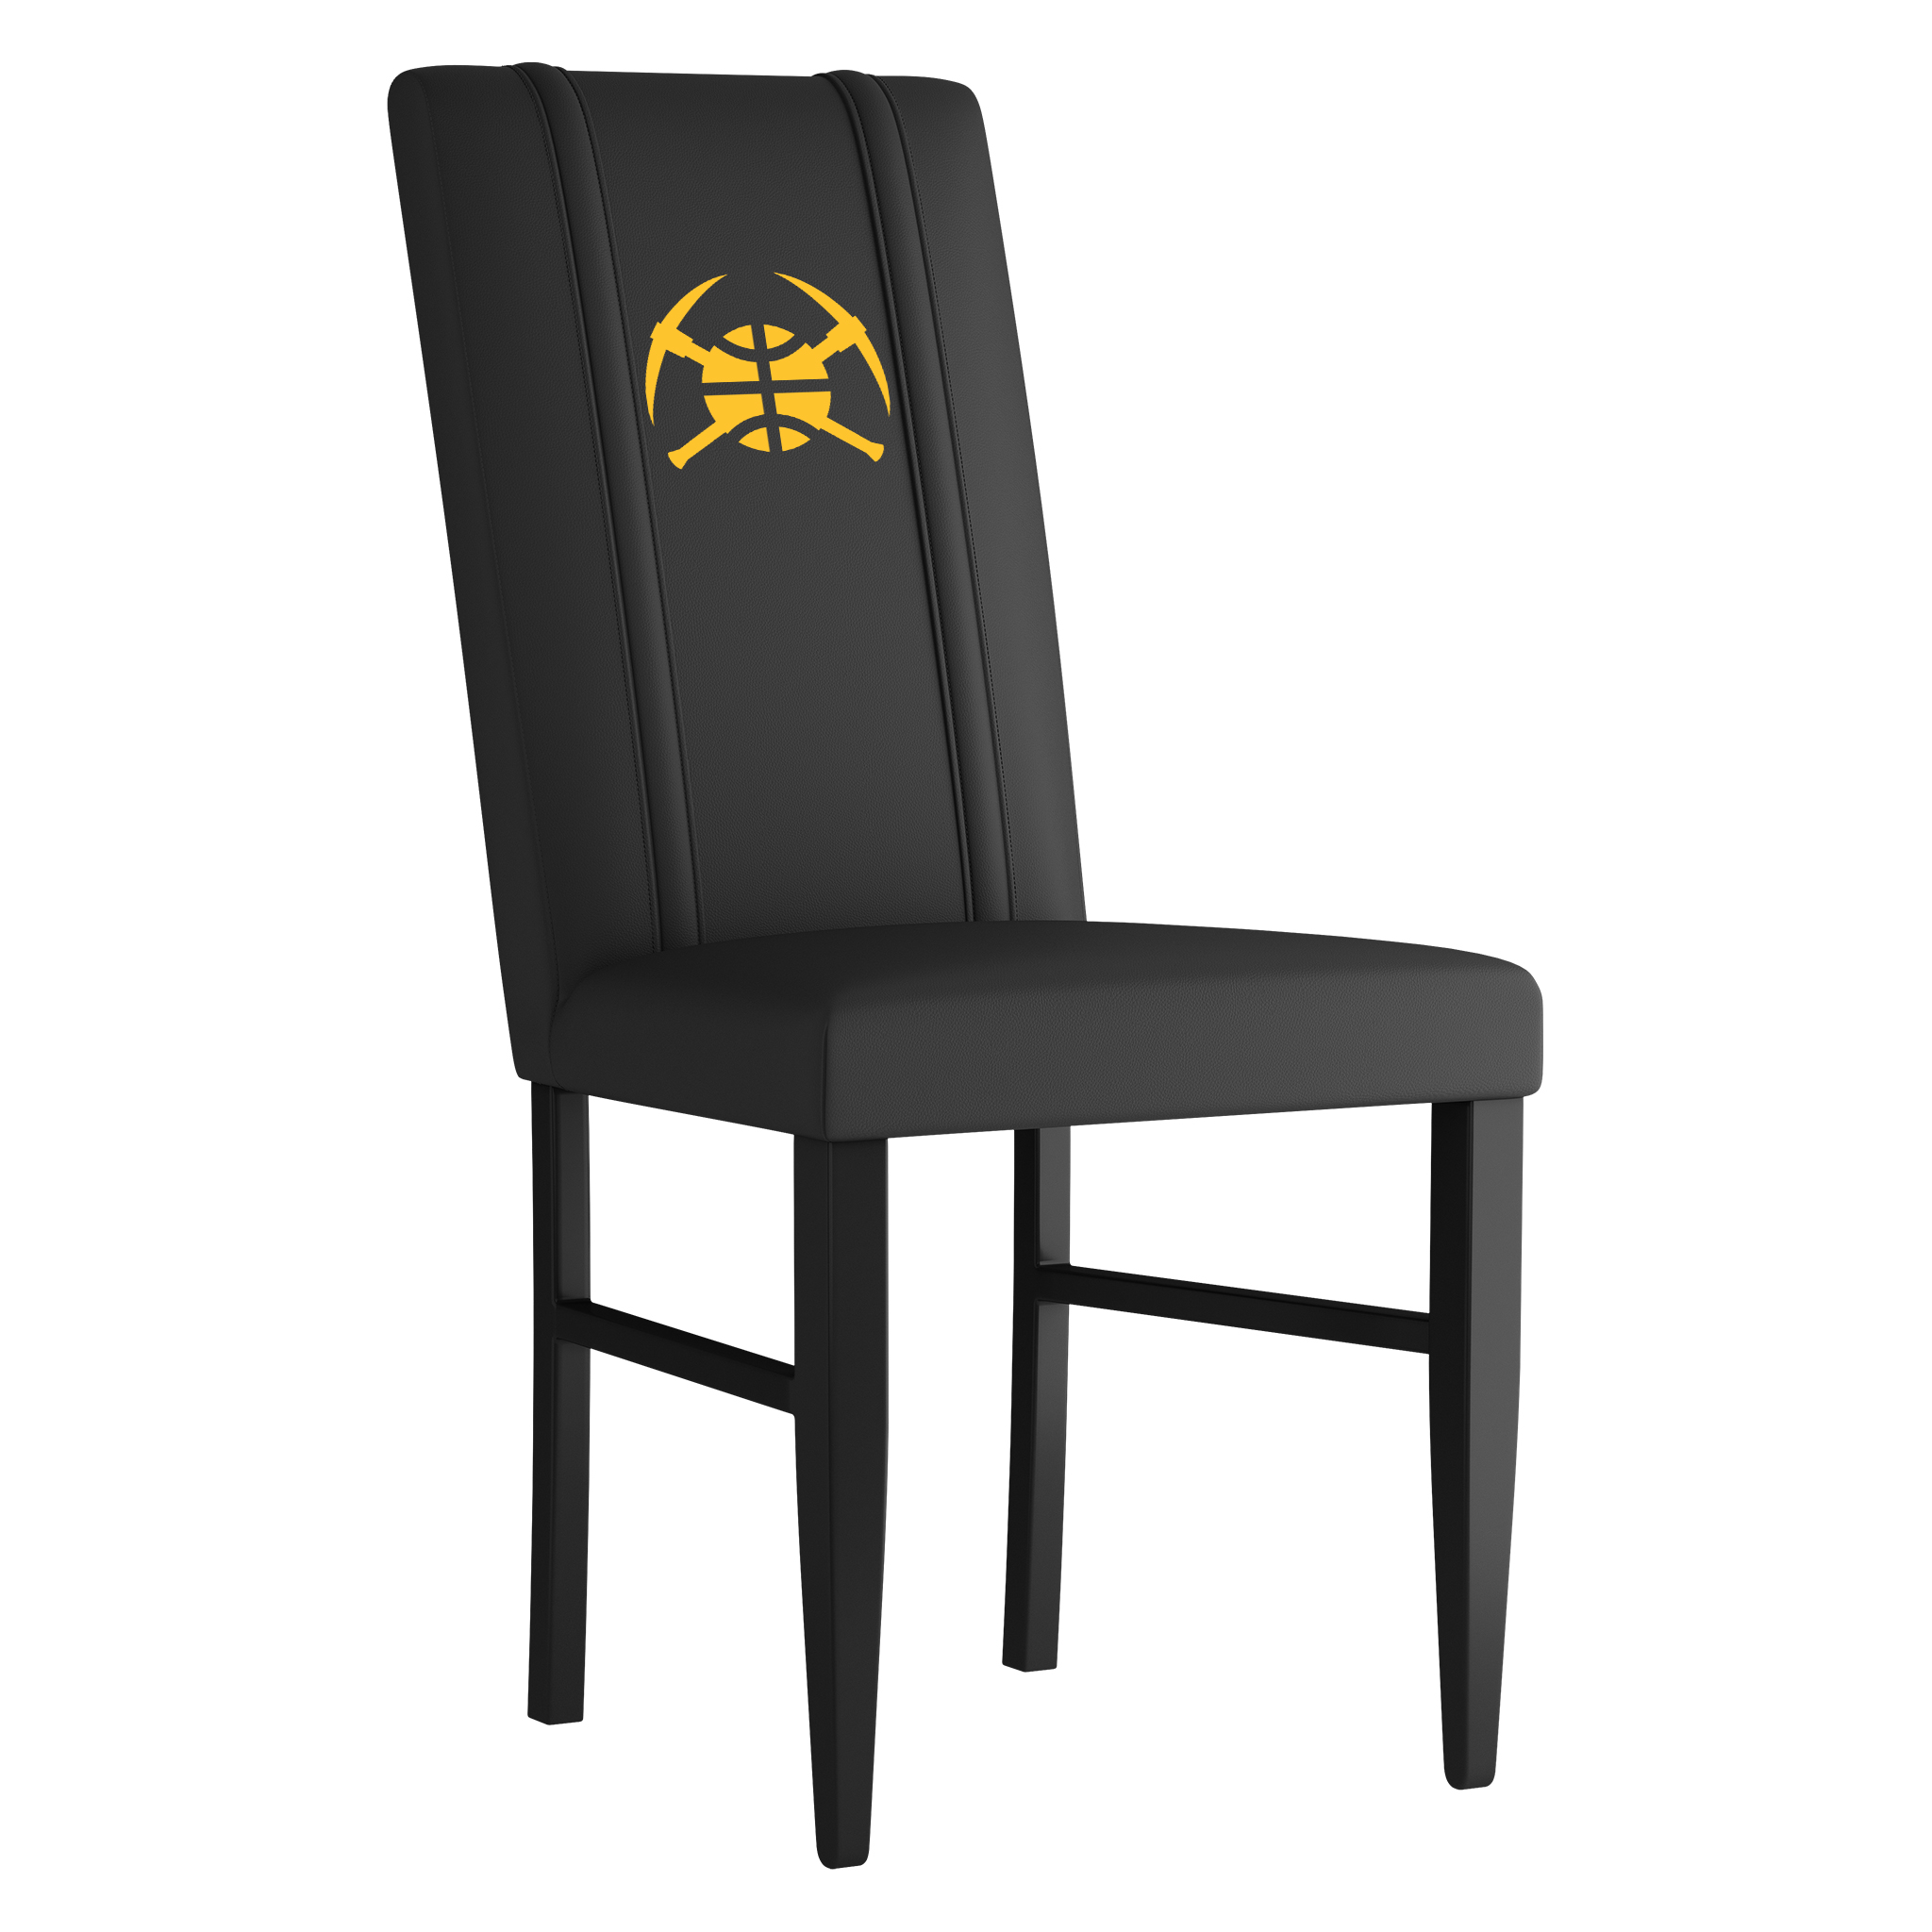 Denver Nuggets Side Chair 2000 With Denver Nuggets Secondary Logo